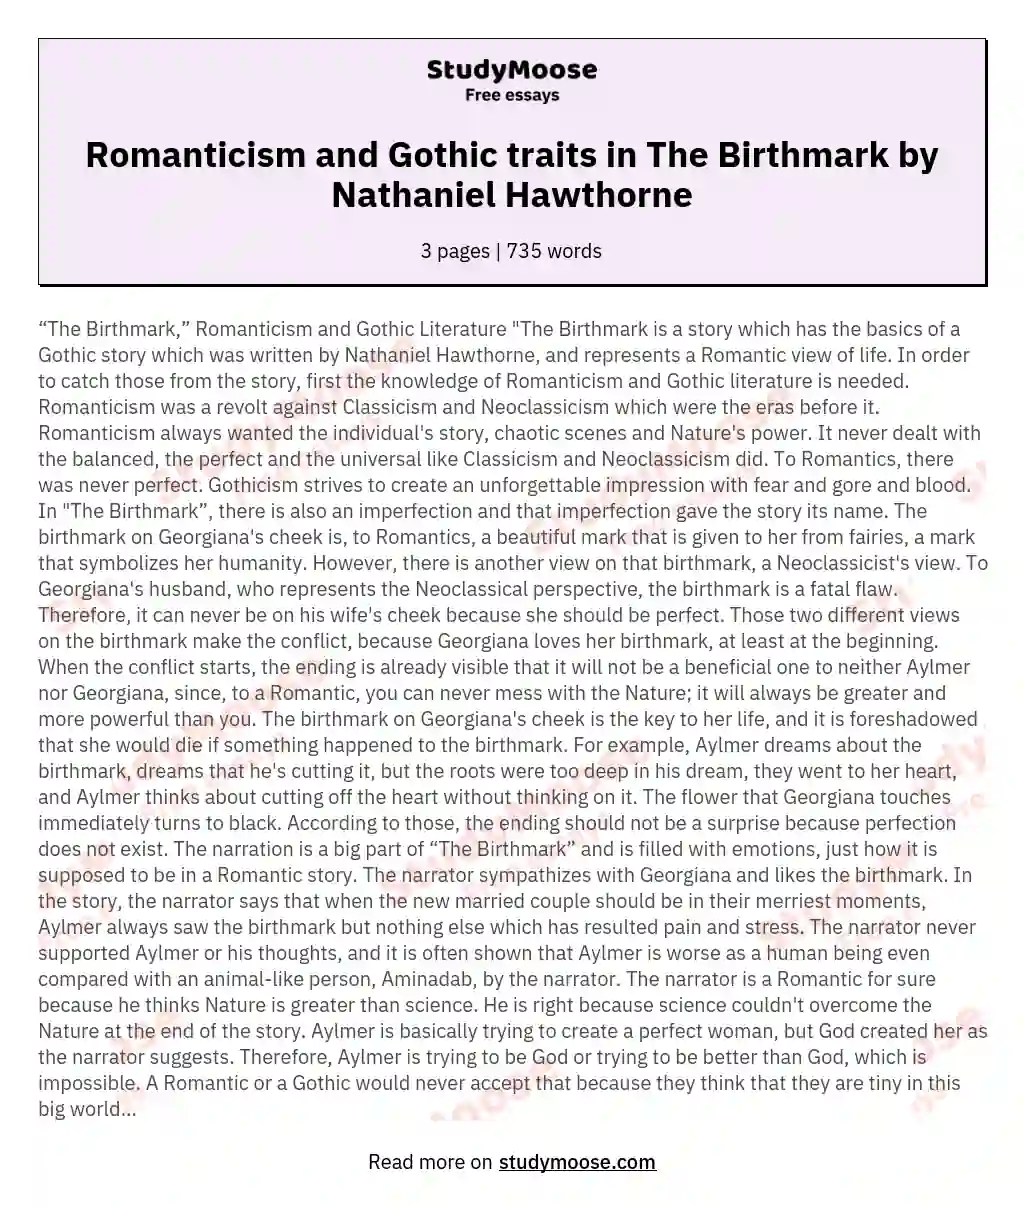 Romanticism and Gothic traits in The Birthmark by Nathaniel Hawthorne essay